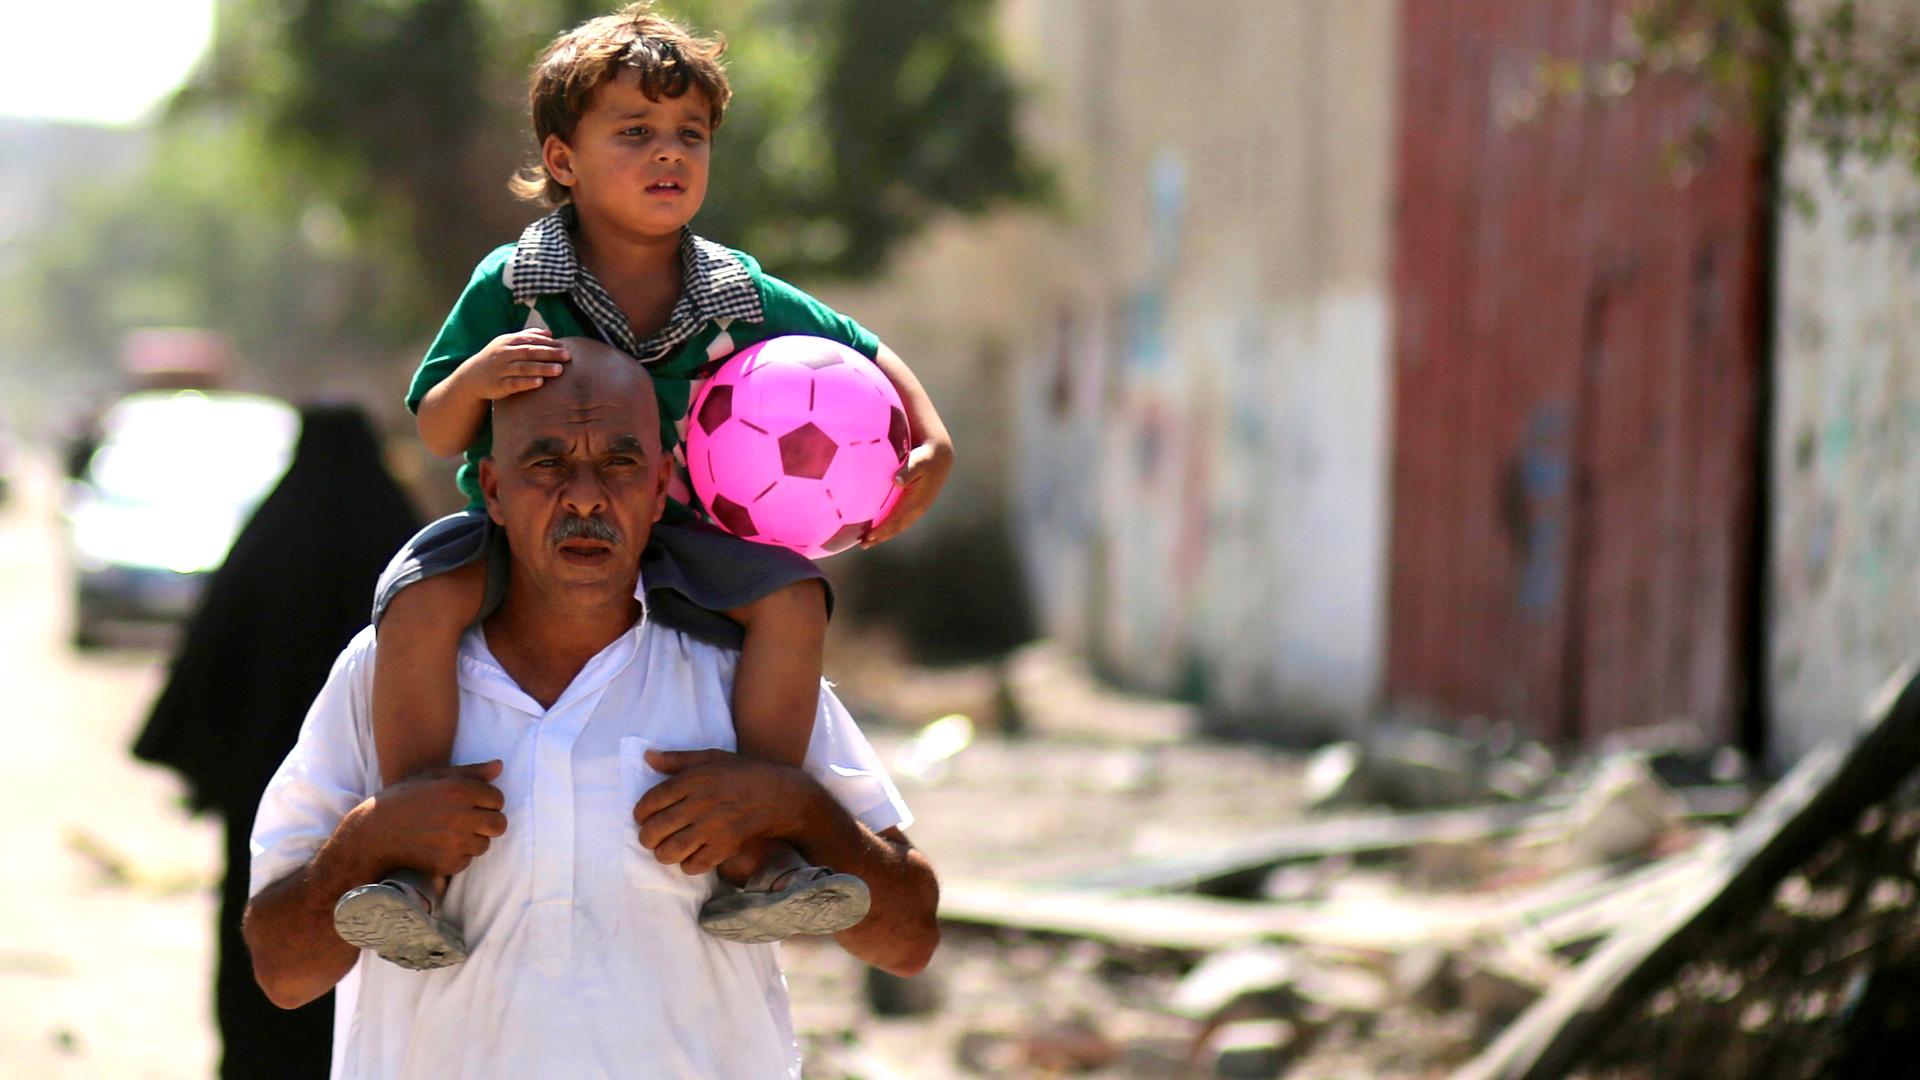 A Palestinian carries his son in the eastern Gaza City neighborhood of Shejaiya, which witnesses said was heavily hit by Israeli shelling and air strikes during an Israeli offensive. (August 1, 2014) 